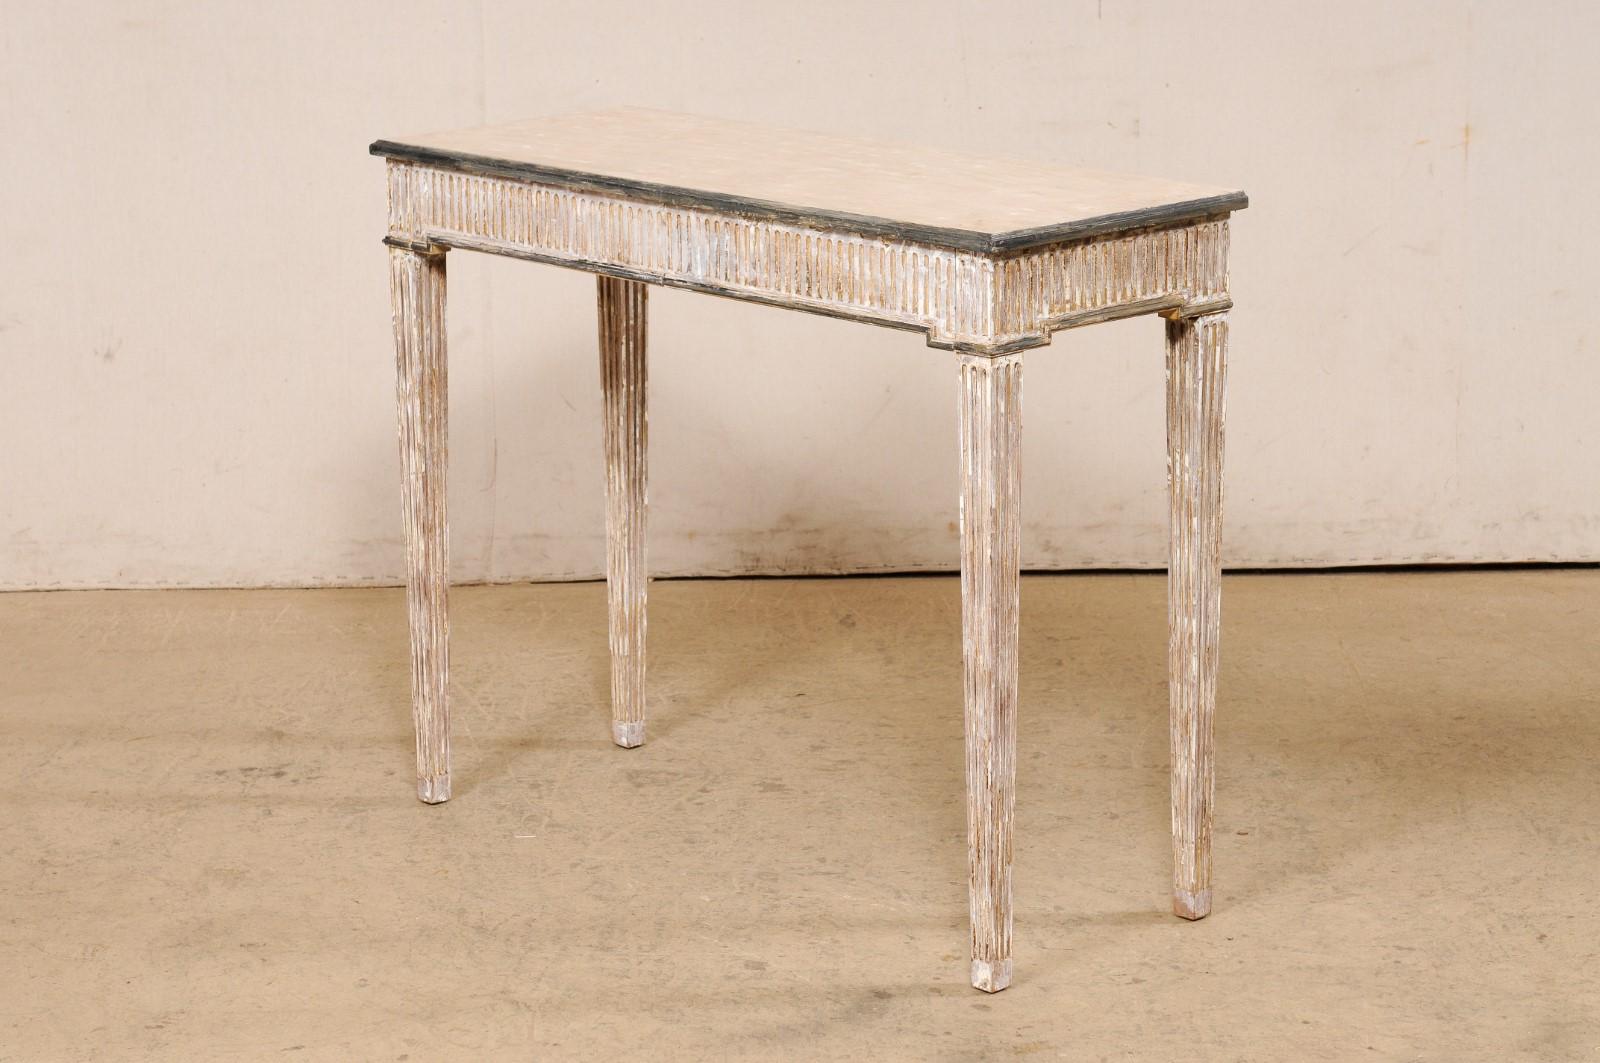 A Slender Italian Console Table Embellished w/Fluted Carvings, Mid 20th C. For Sale 3